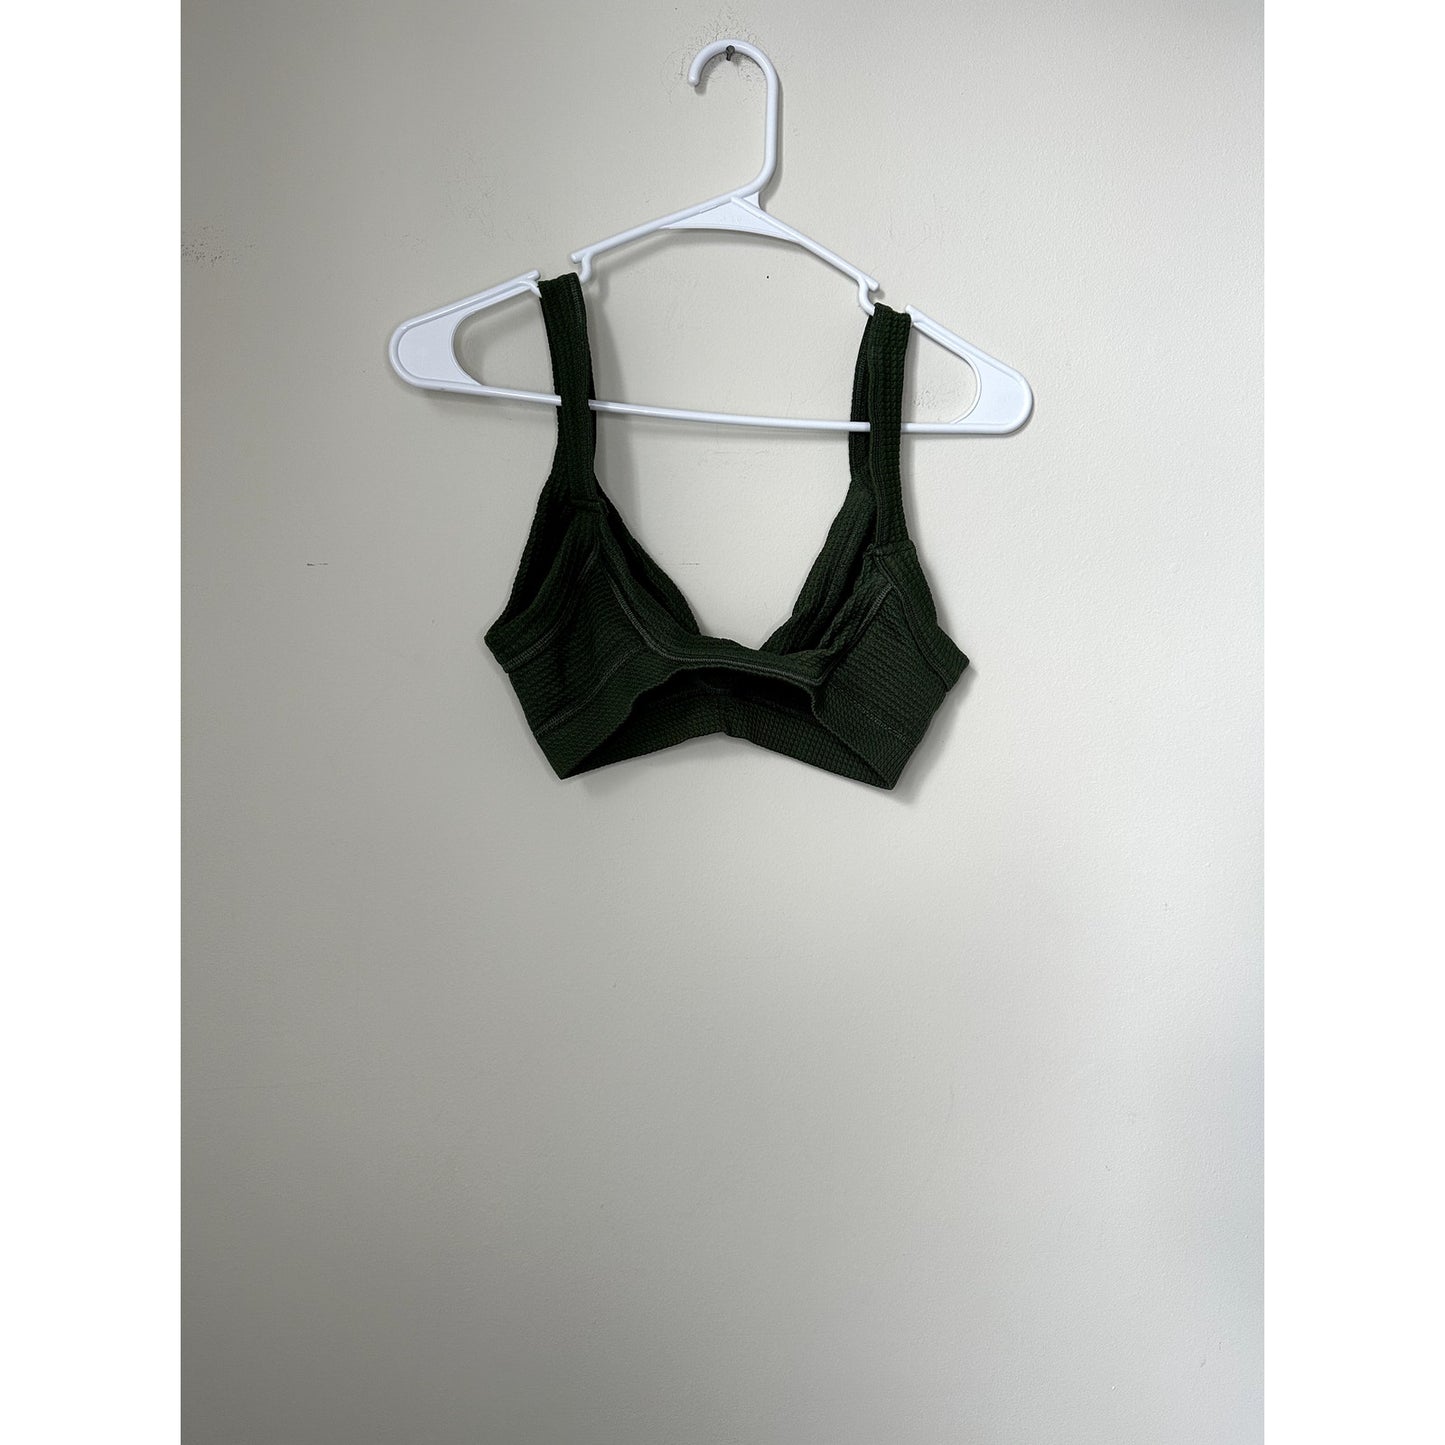 Urban Outfitters Out From Under Bralette, Size M/L